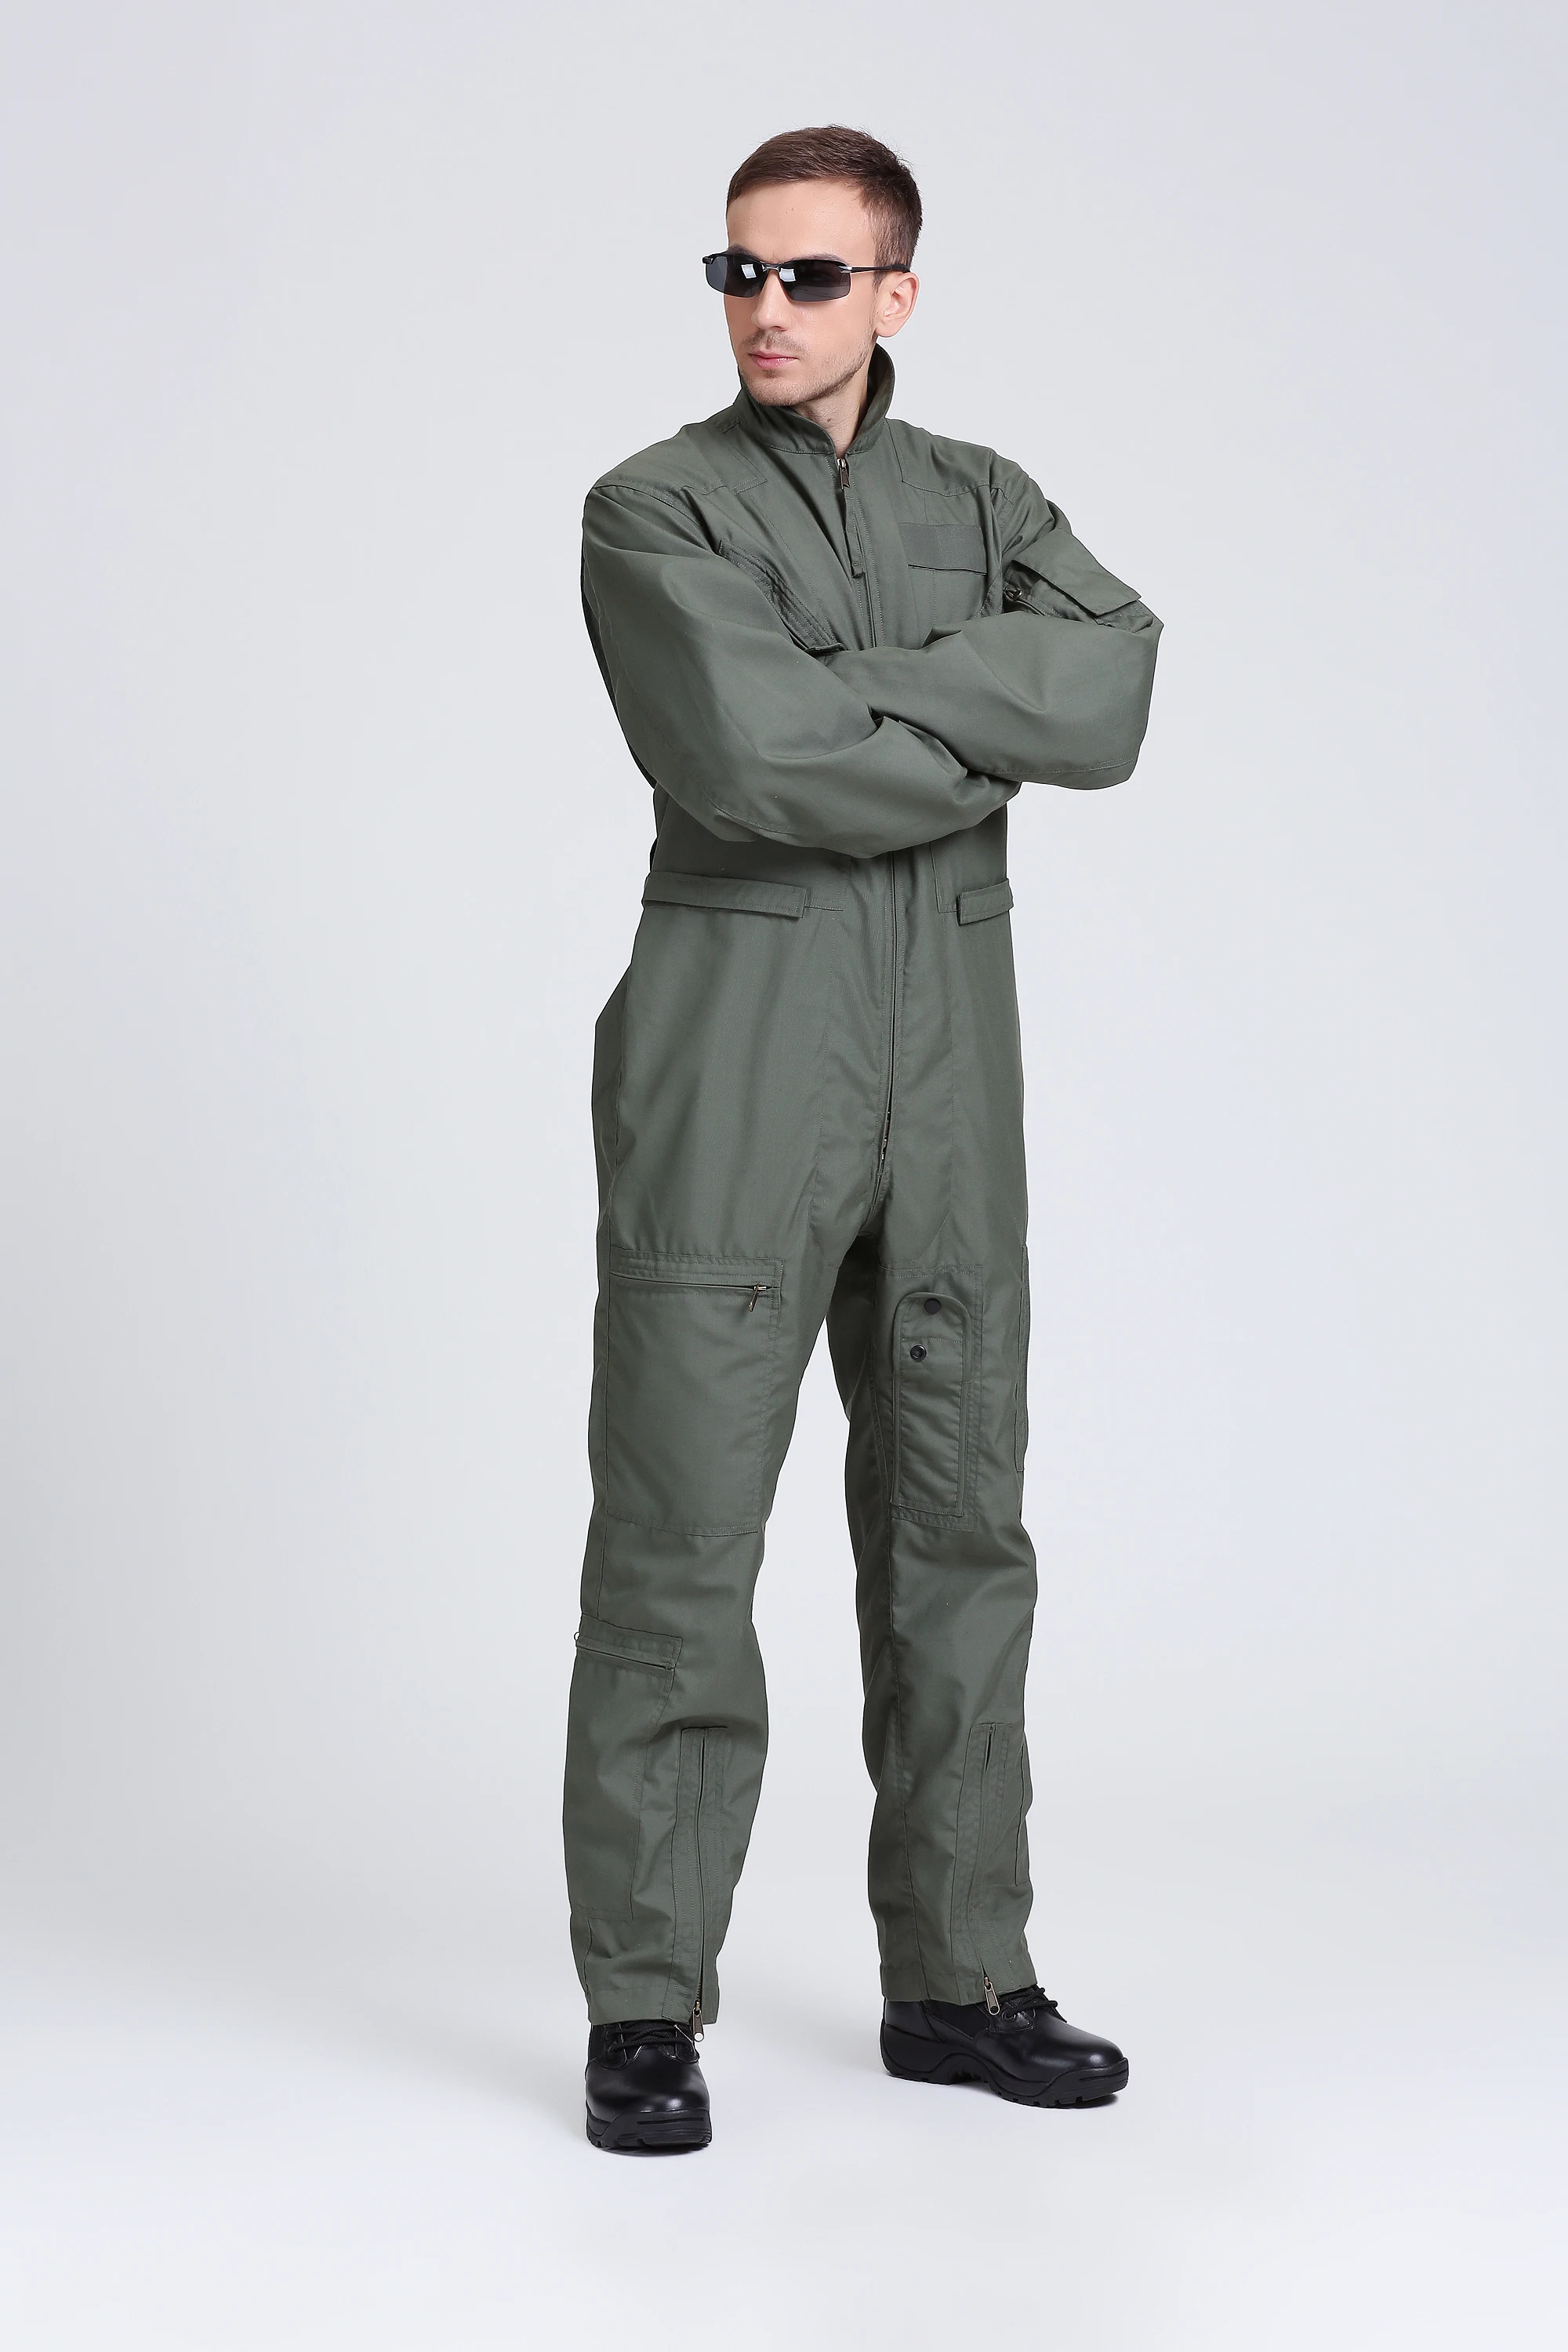 High Quality Durable Military Green Flying Suit Military Pilot Coverall